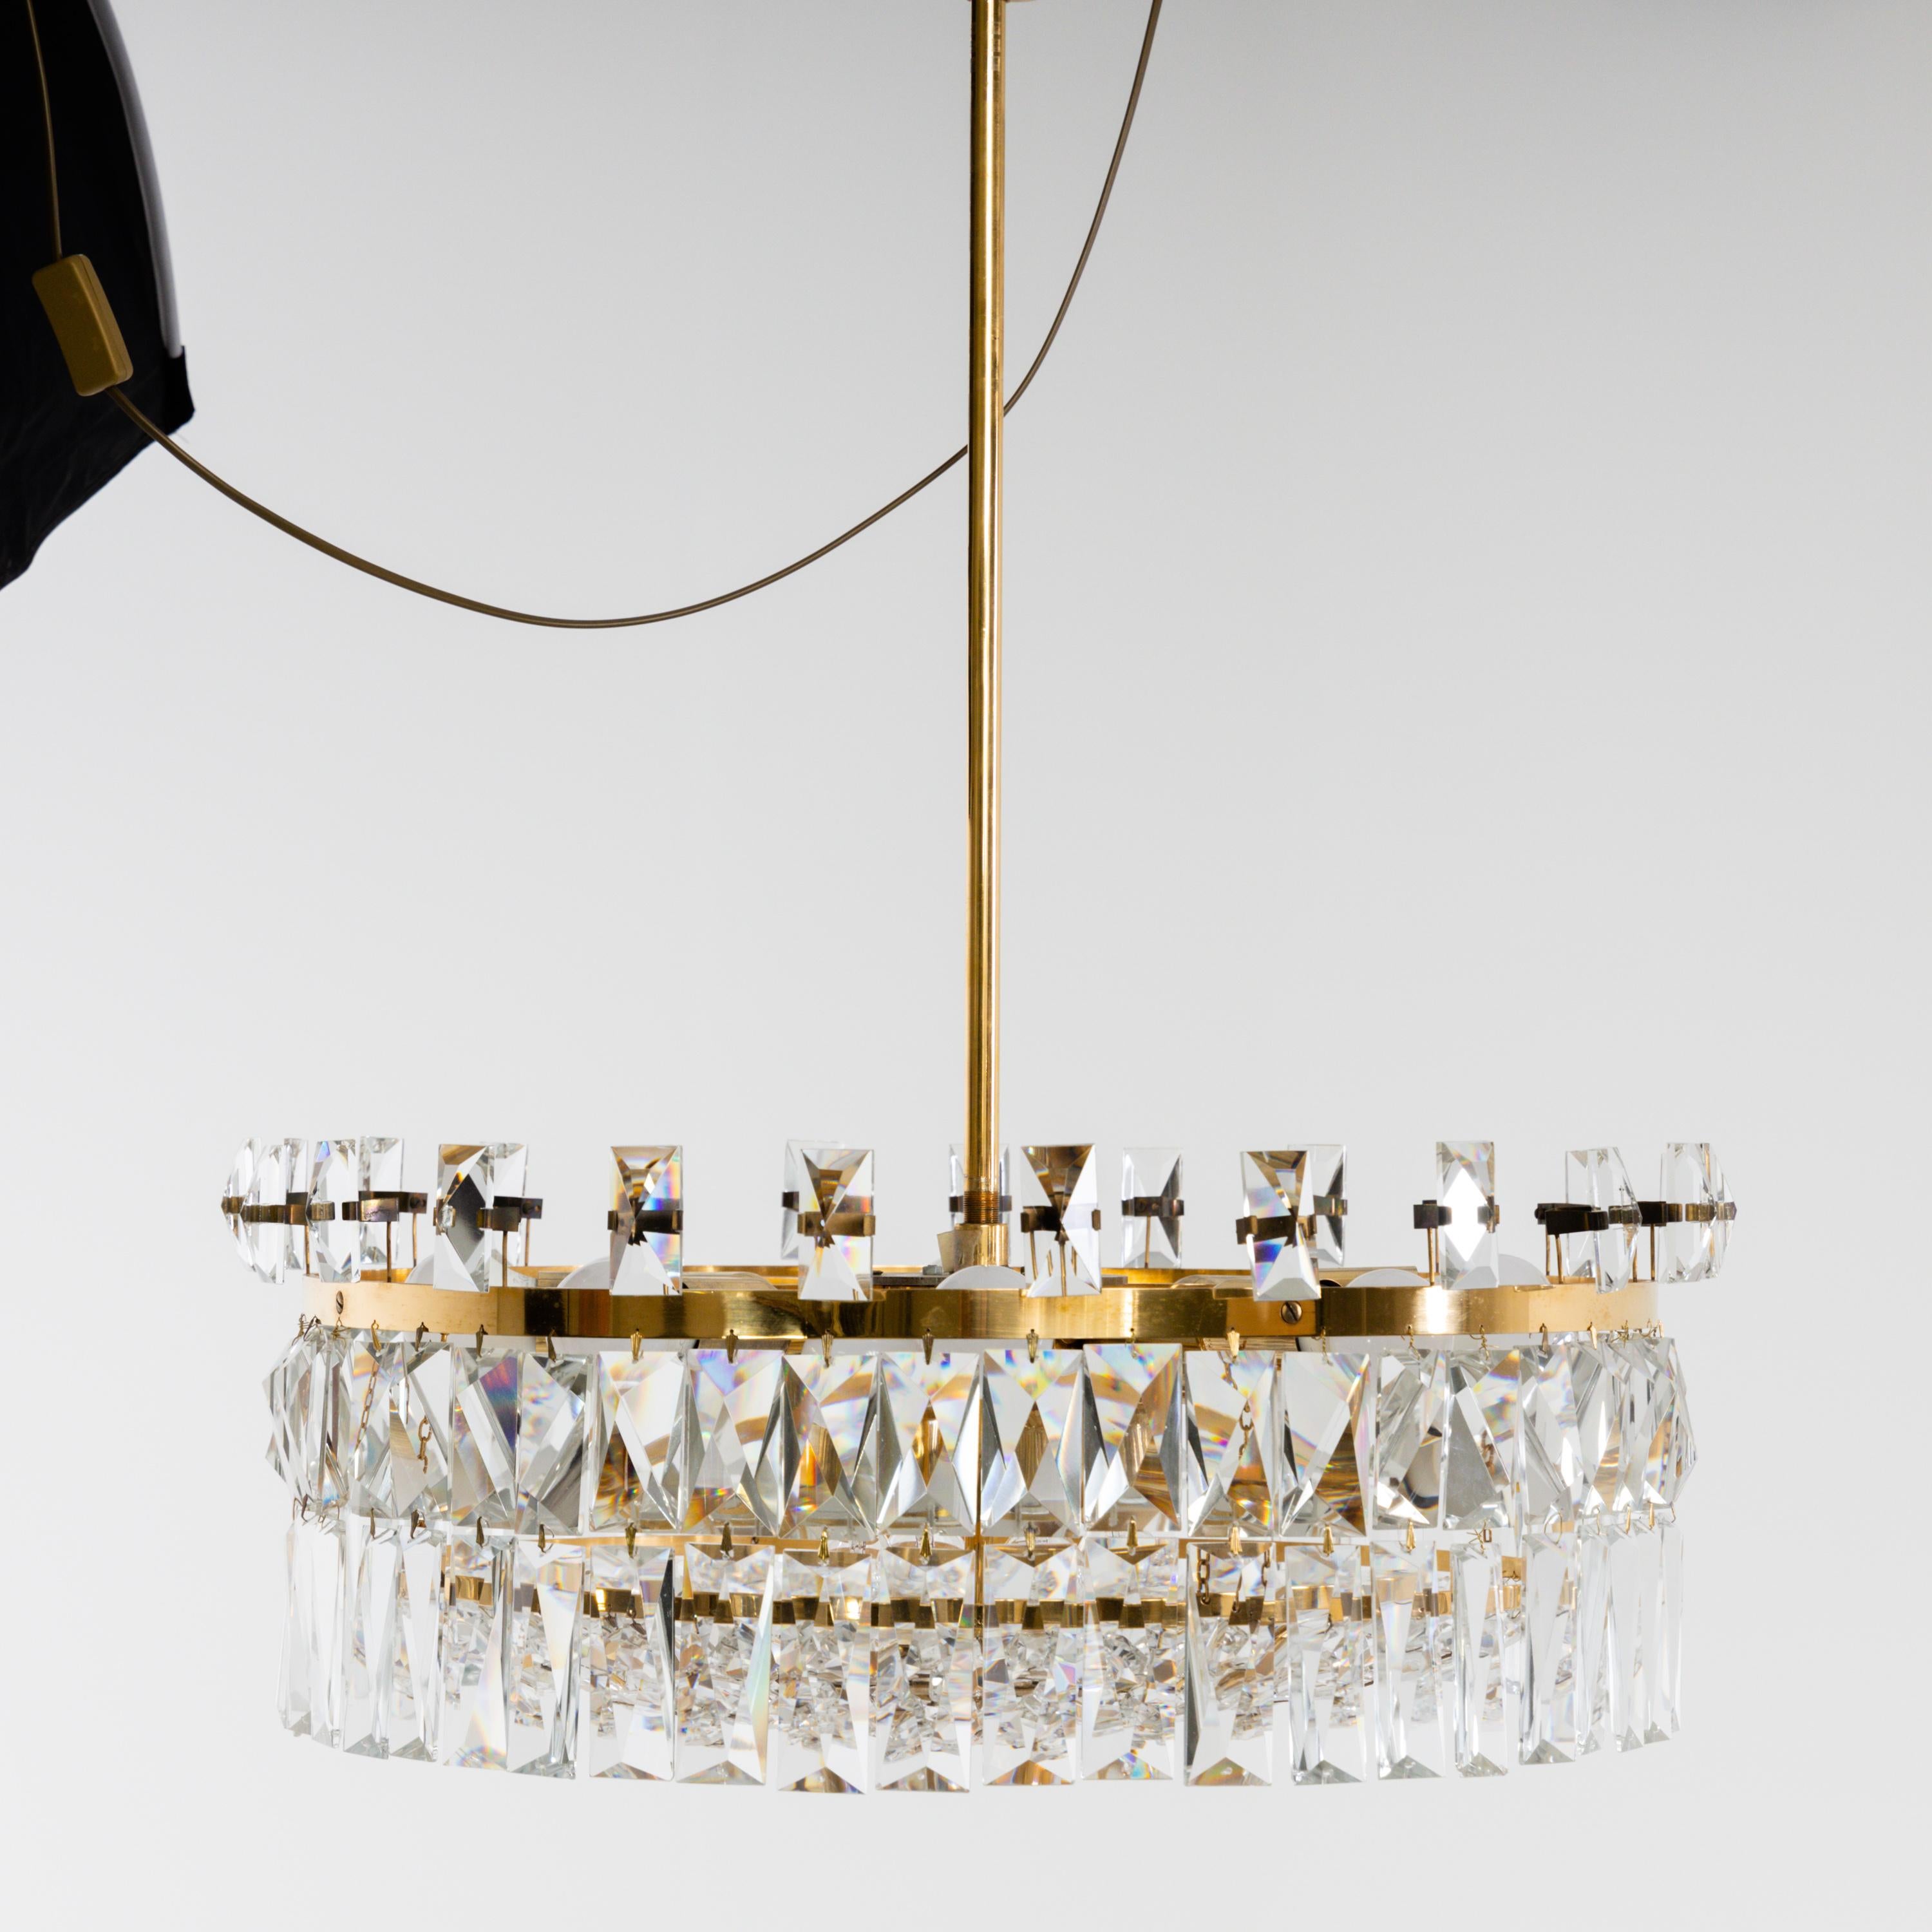 Large two-tier Lobmeyr chandeliers with cut crystal hangings on narrow brass hoops. The model was originally designed for the Markthalle Feldkirch in 1972.